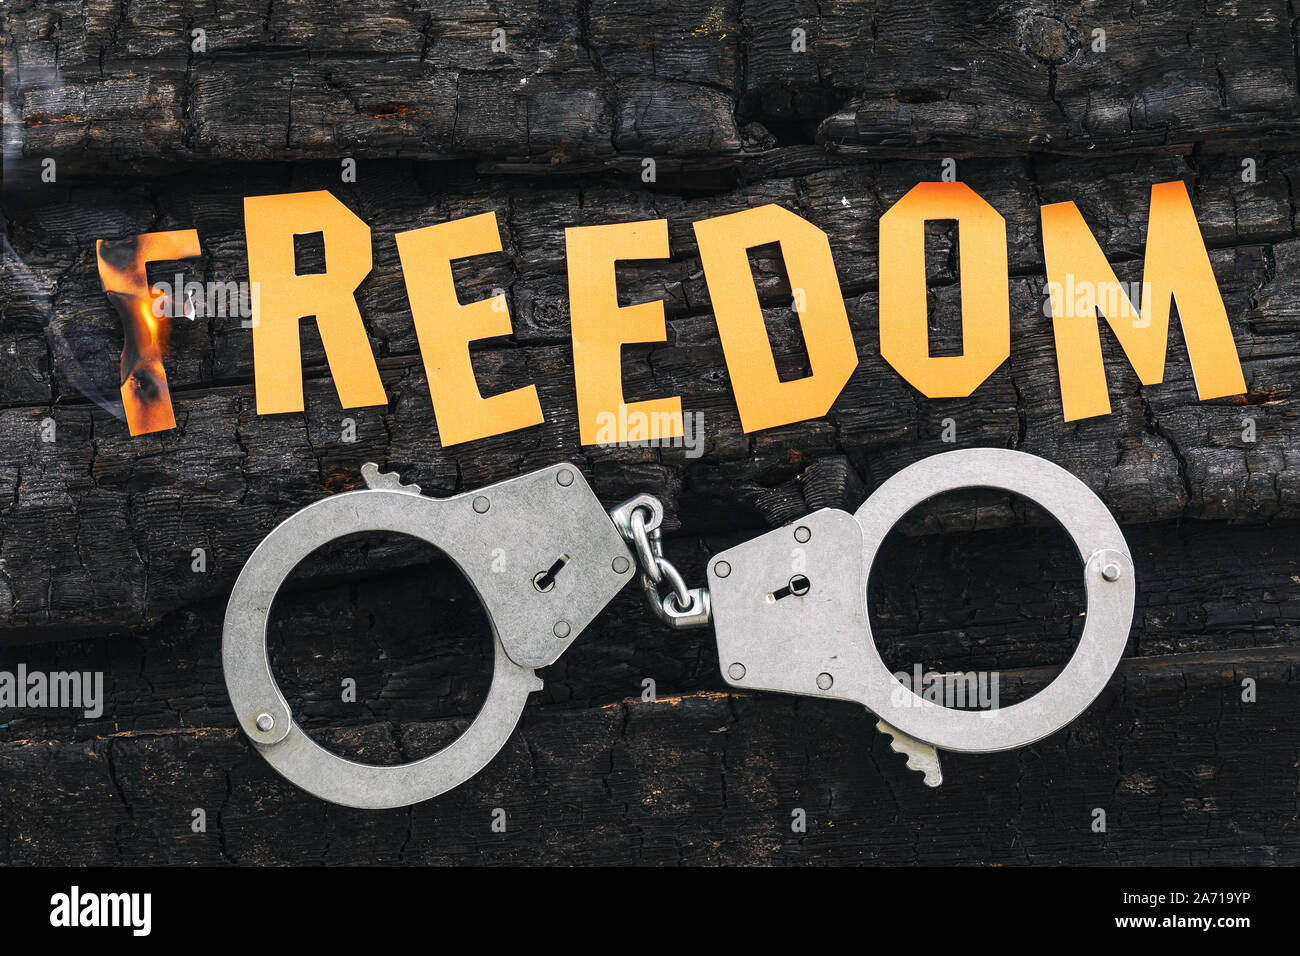 Freedom is in danger. Burning letters made of paper and handcuffs lying nearby on charred boards. Justice concept Stock Photo